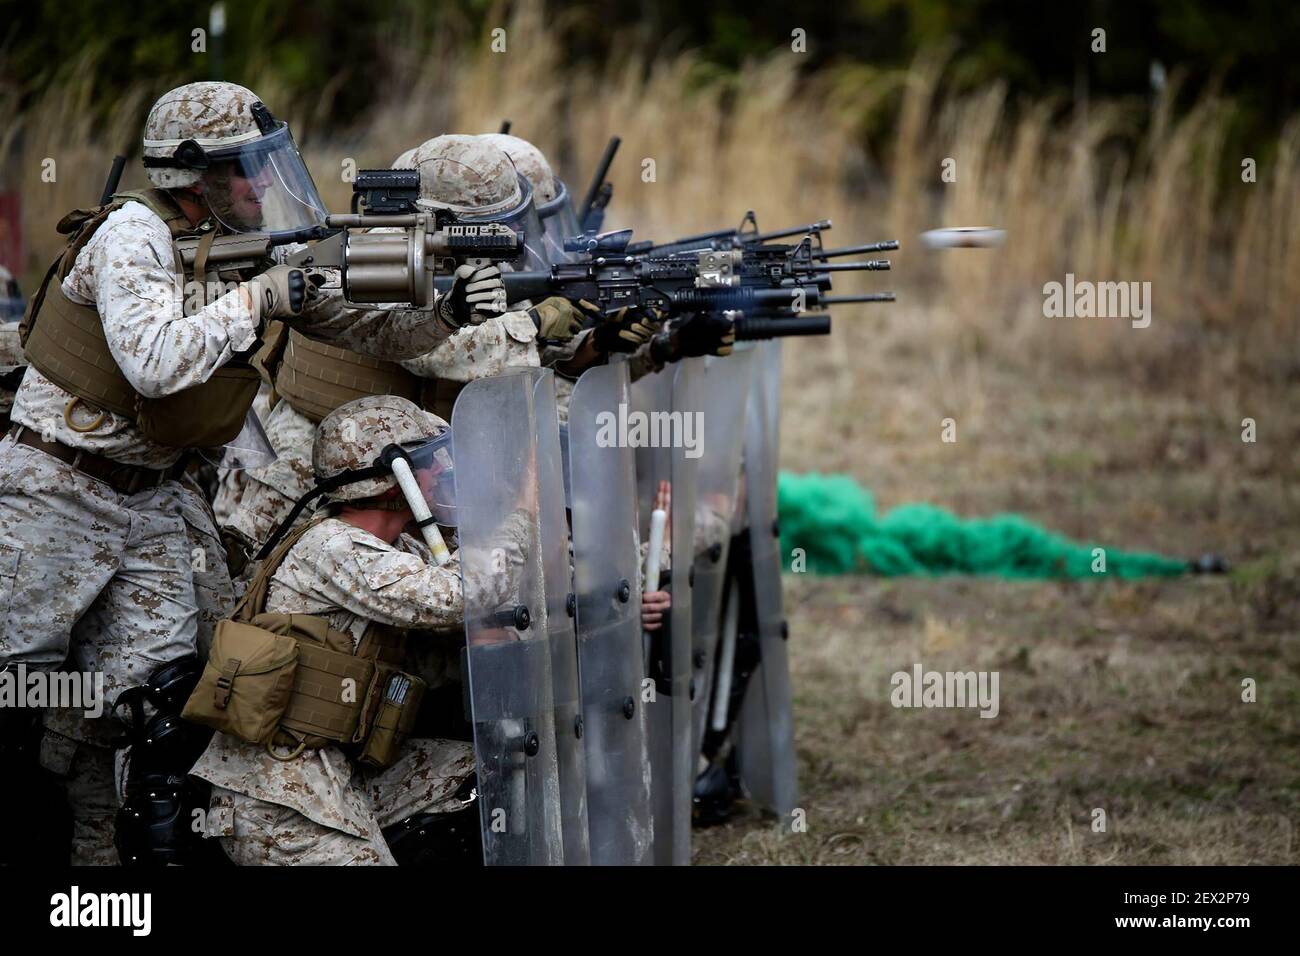 Marines with 2nd Battalion, 6th Marines fire their M203 and M32 grenade launchers with non-lethal rounds down range during a riot control exercise aboard Camp Lejeune , North Carolina, March 24, 2015. (Photo by Cpl. Kaitlyn Klein/U.S. Marine Corps) *** Please Use Credit from Credit Field *** Stock Photo